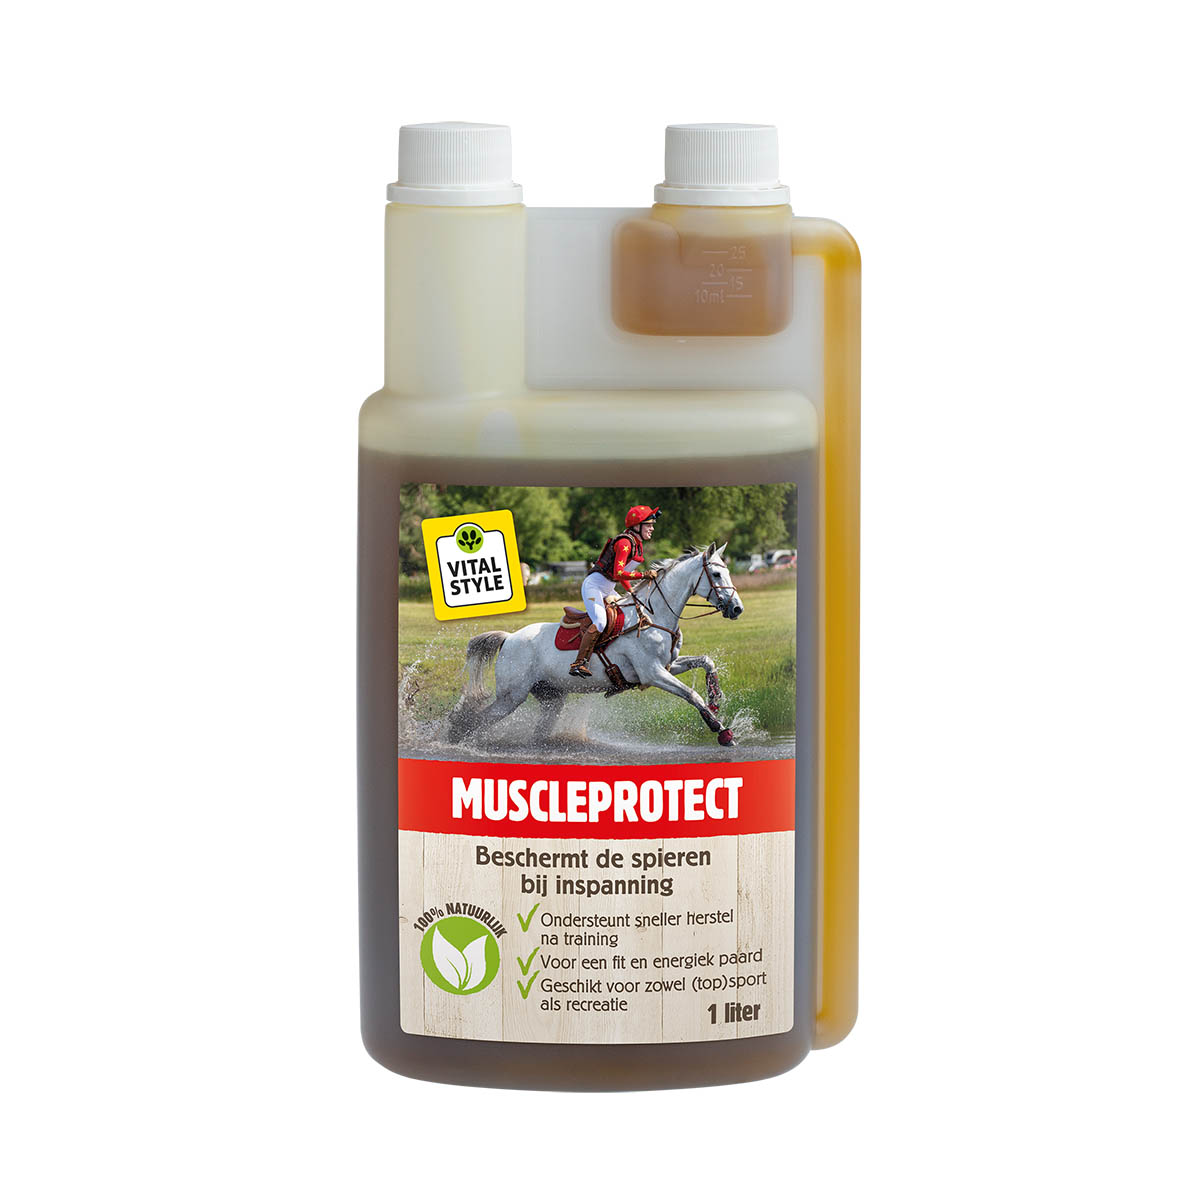 VITALstyle Muscleprotect - Paardensupplement - 1 L